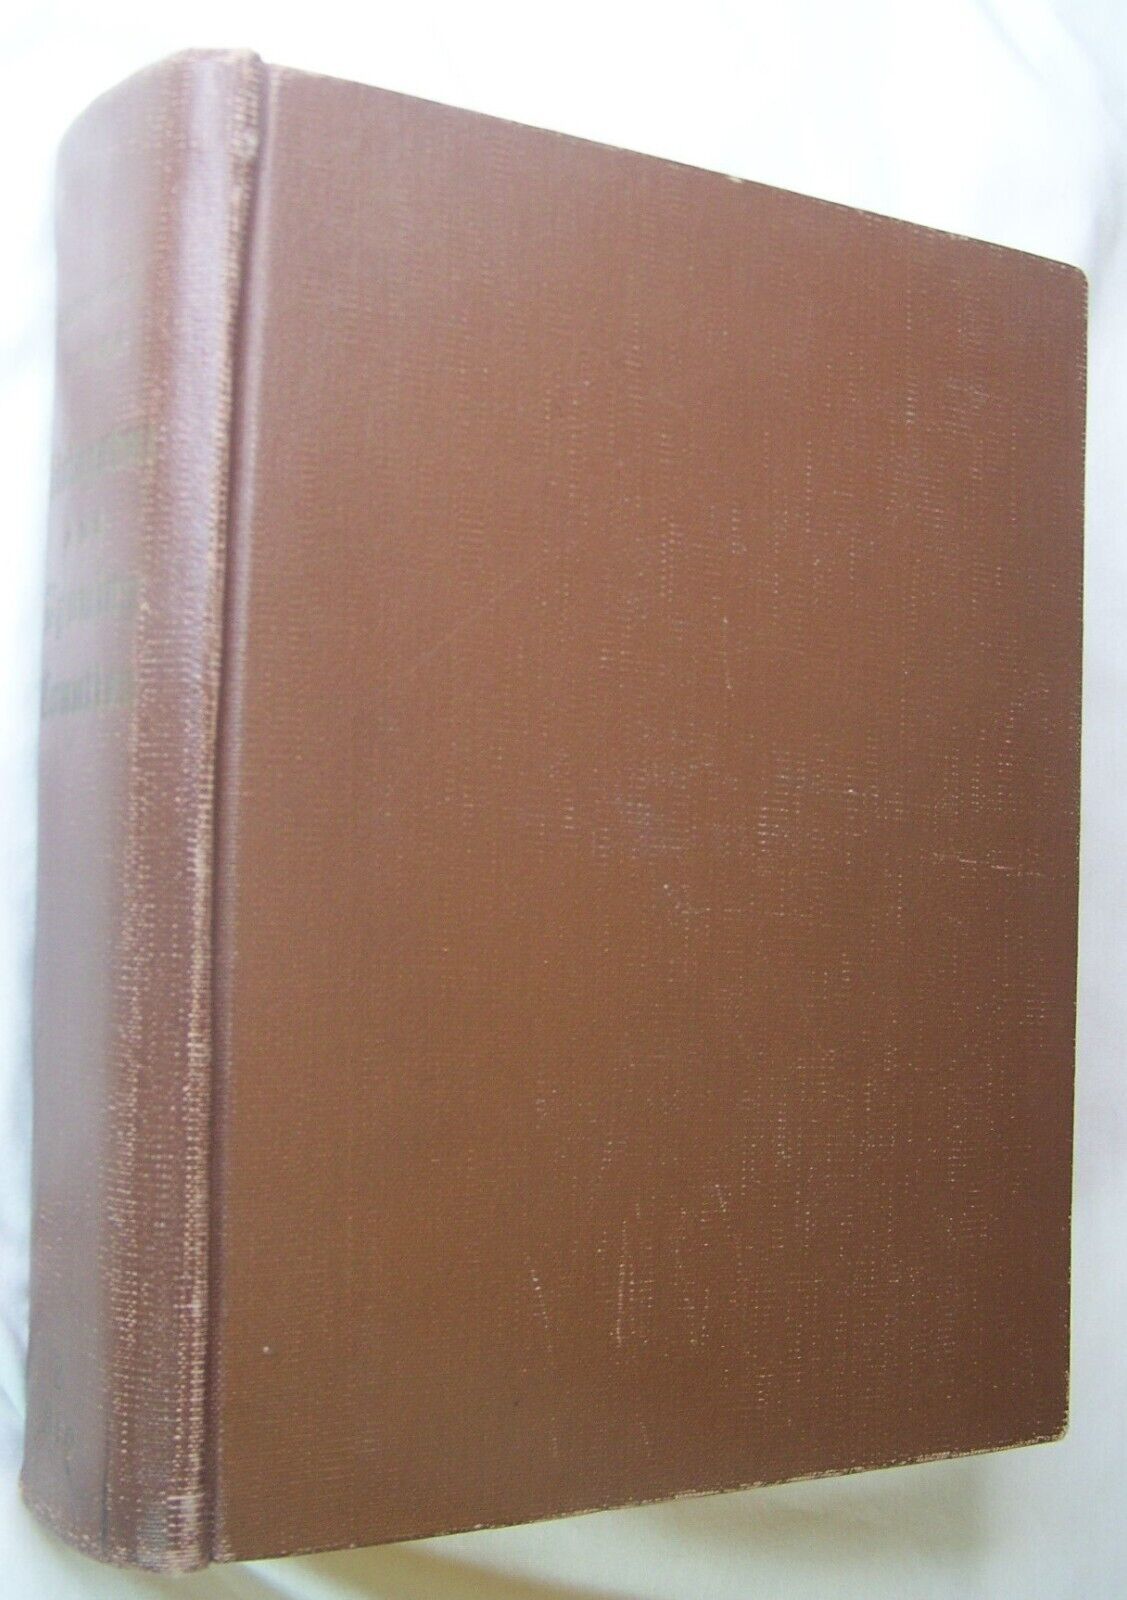 1895 ANTIQUE LIVINGSTON & WYOMING COUNTY NY BIOGRAPHY HISTORY BOOK GENESEO AVON+